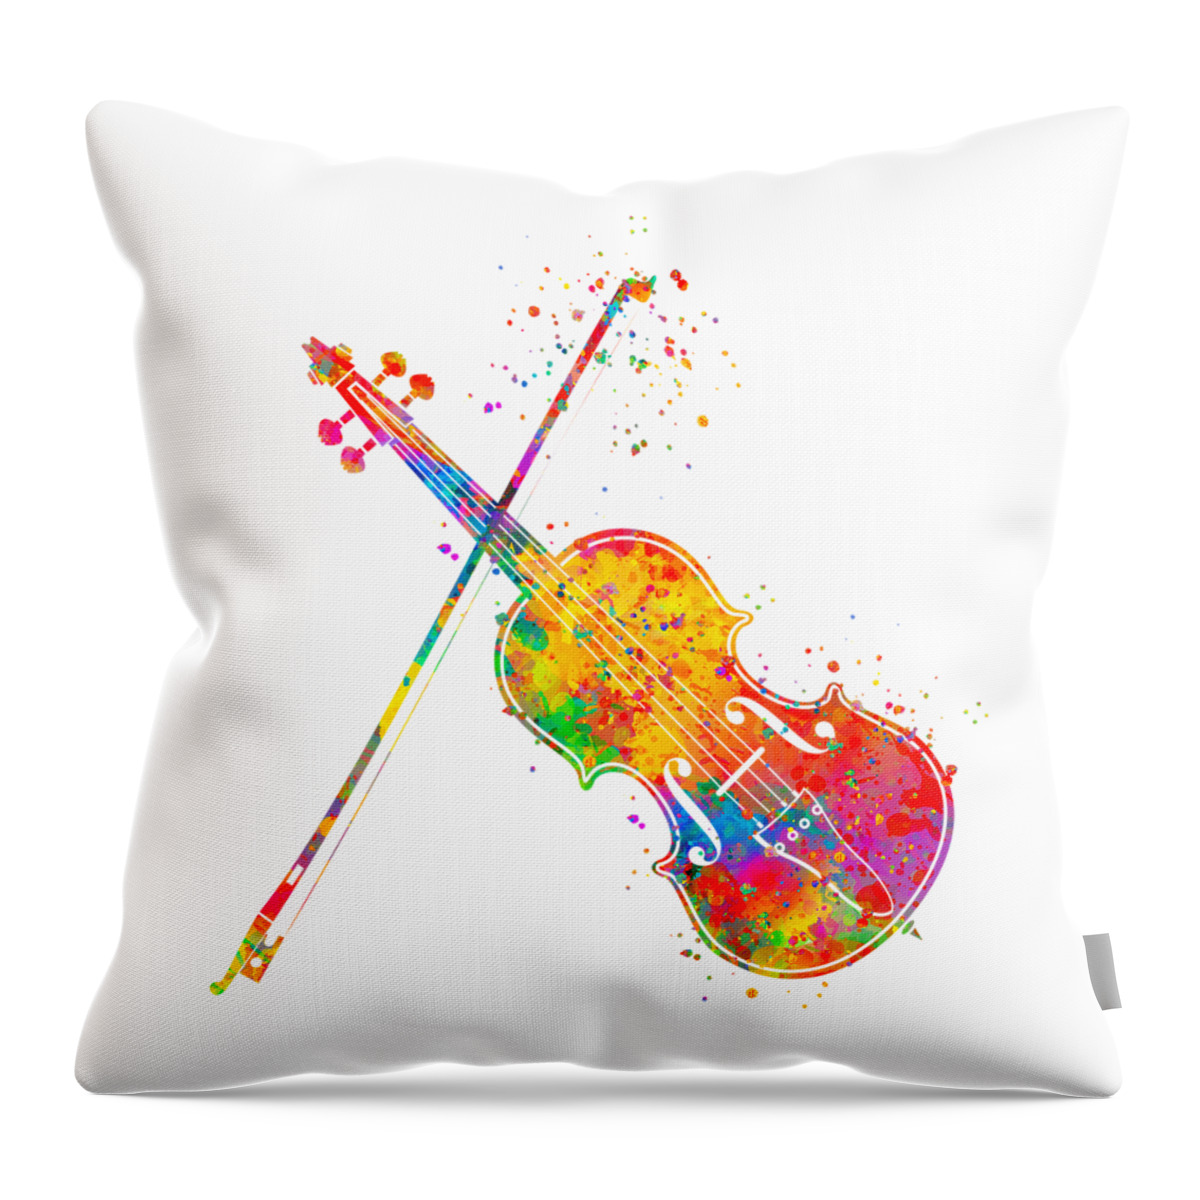 Violin Throw Pillow featuring the painting Violin Art by Zuzi 's